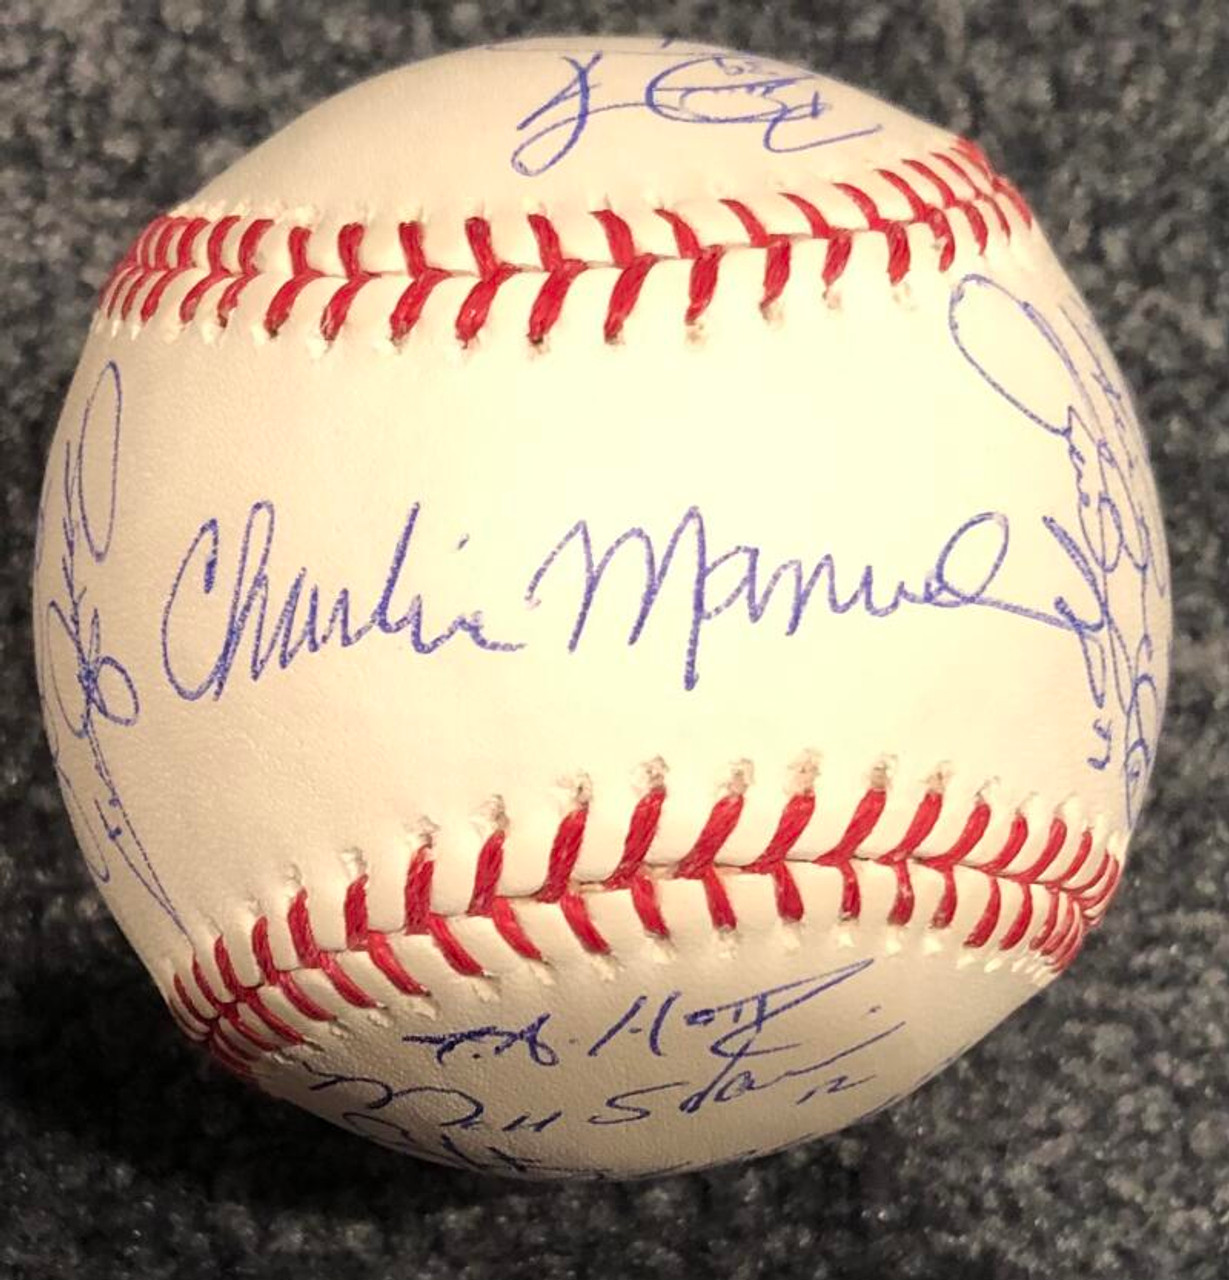 Stunning 1964 St. Louis Cardinals World Series Champs Team Signed